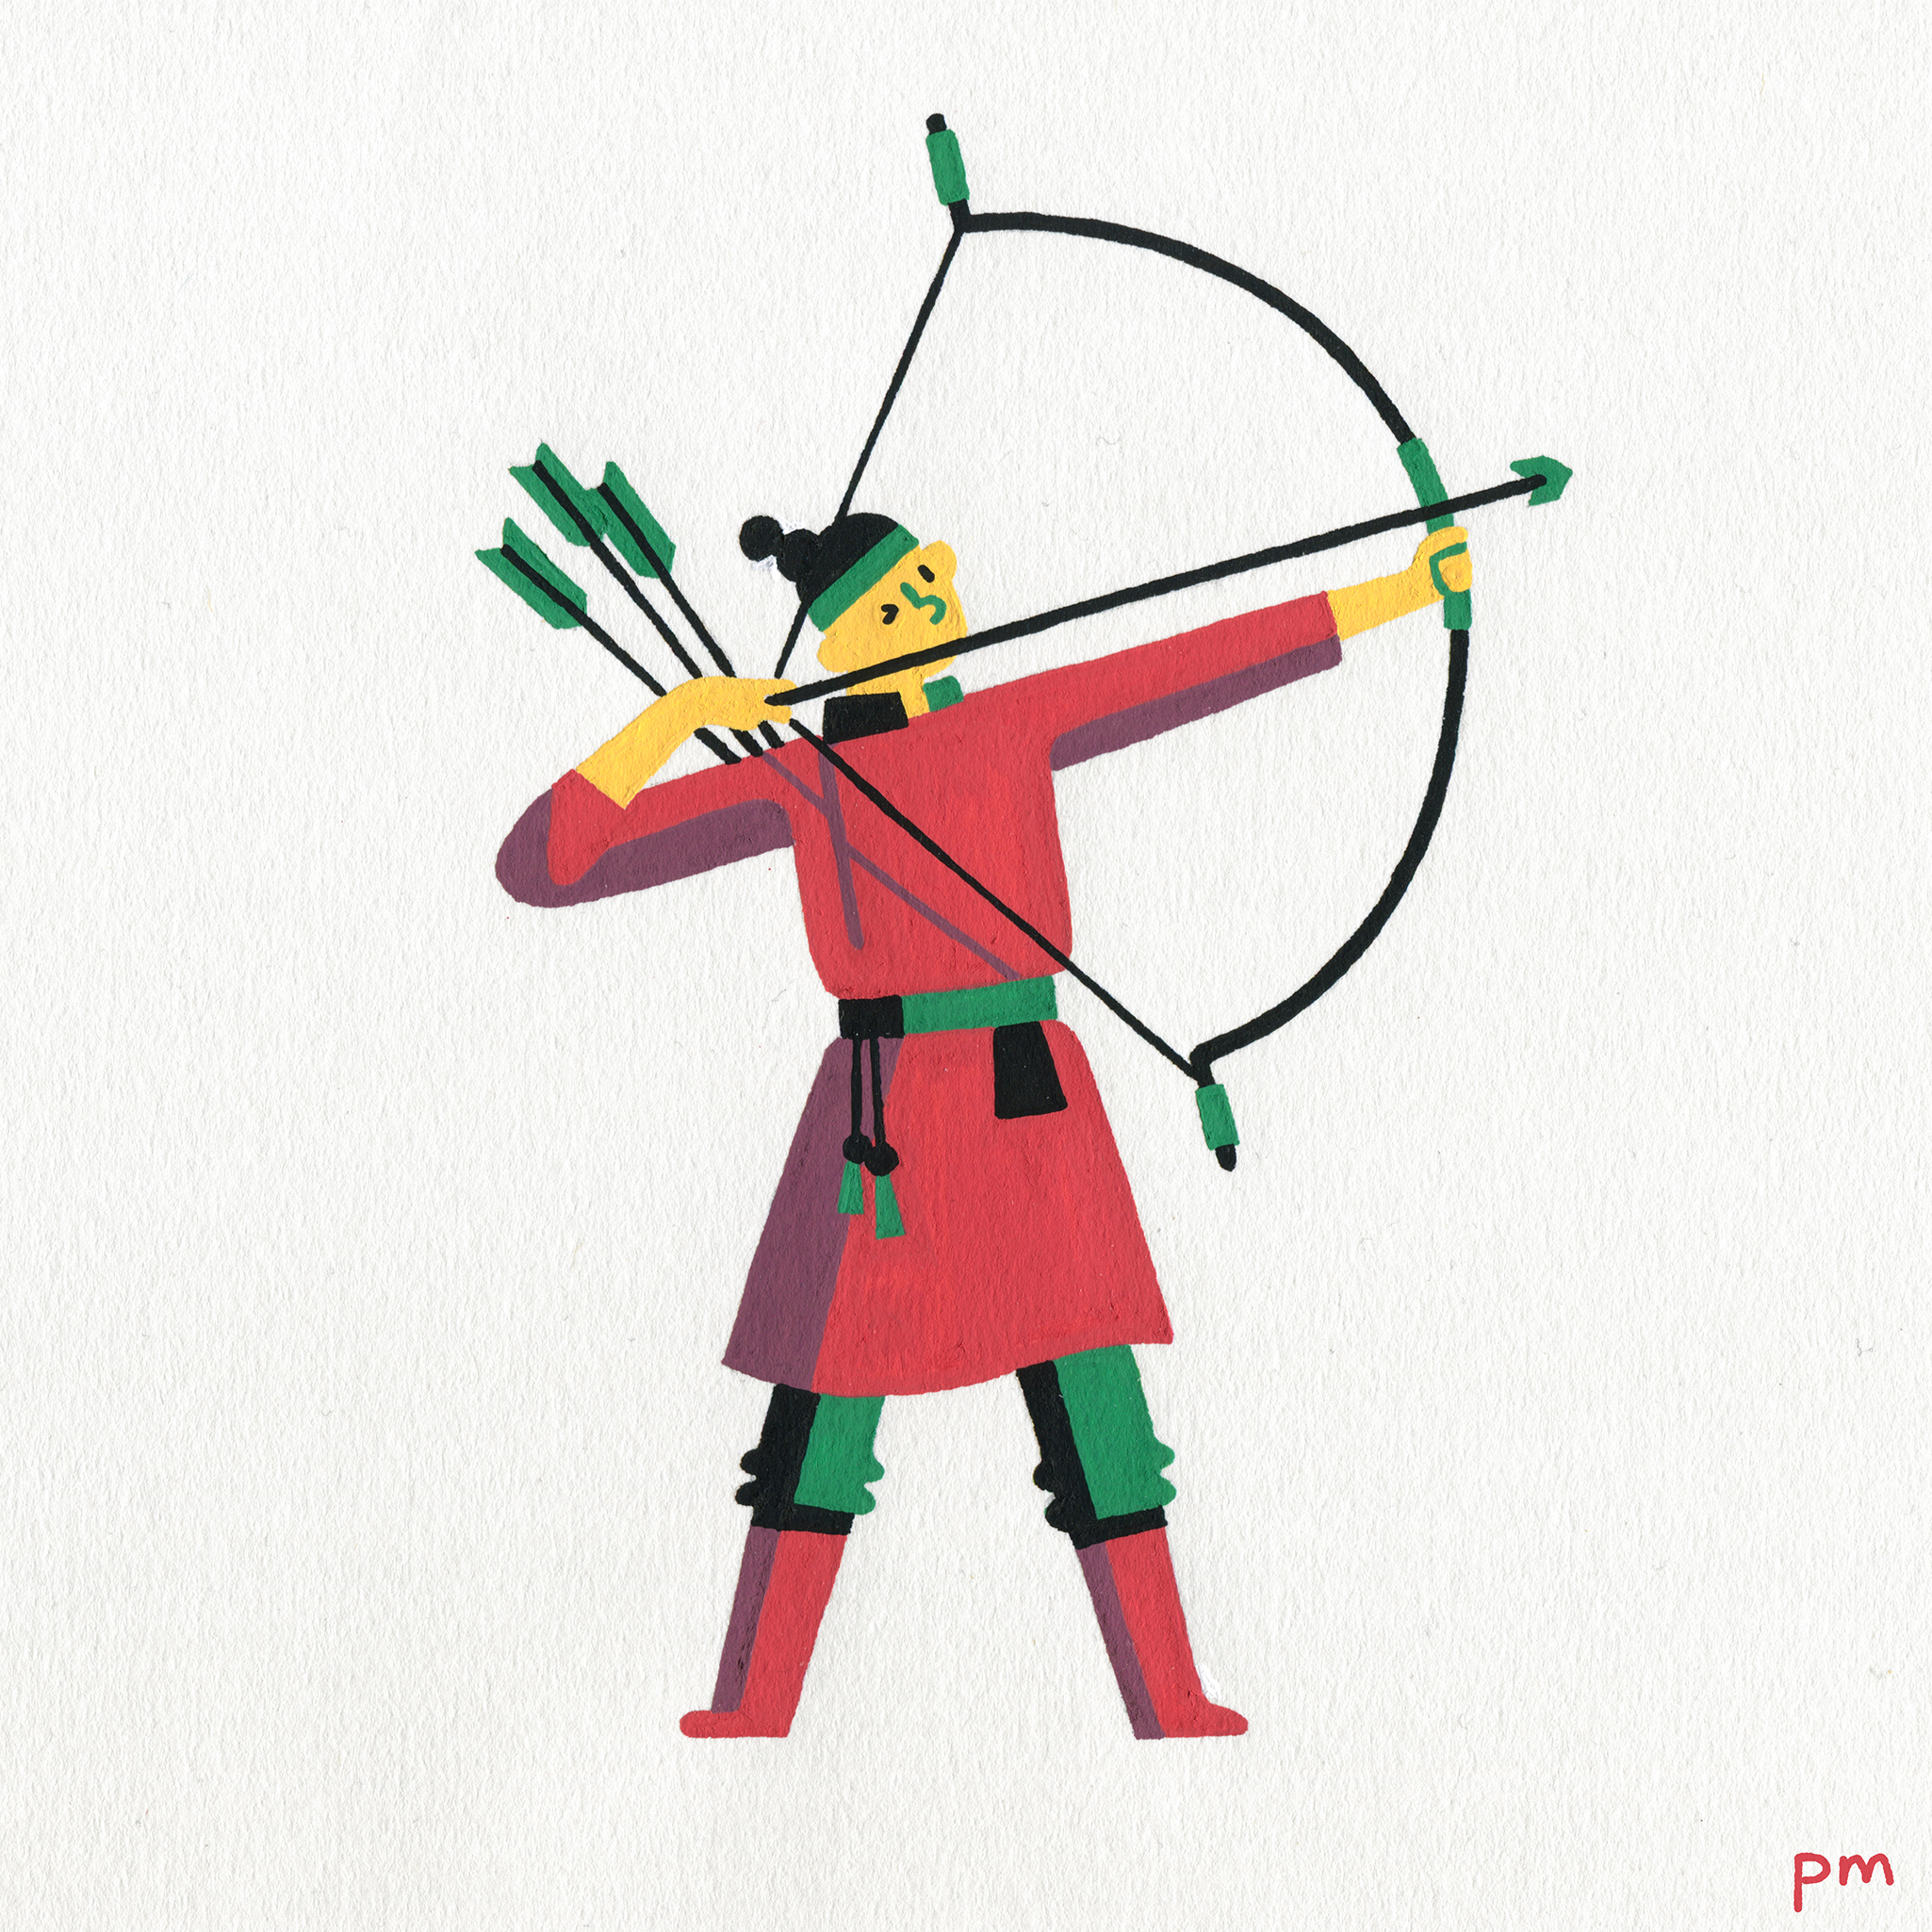 Here is an illustration of a Mongolian archer character for my illustrated sports series.